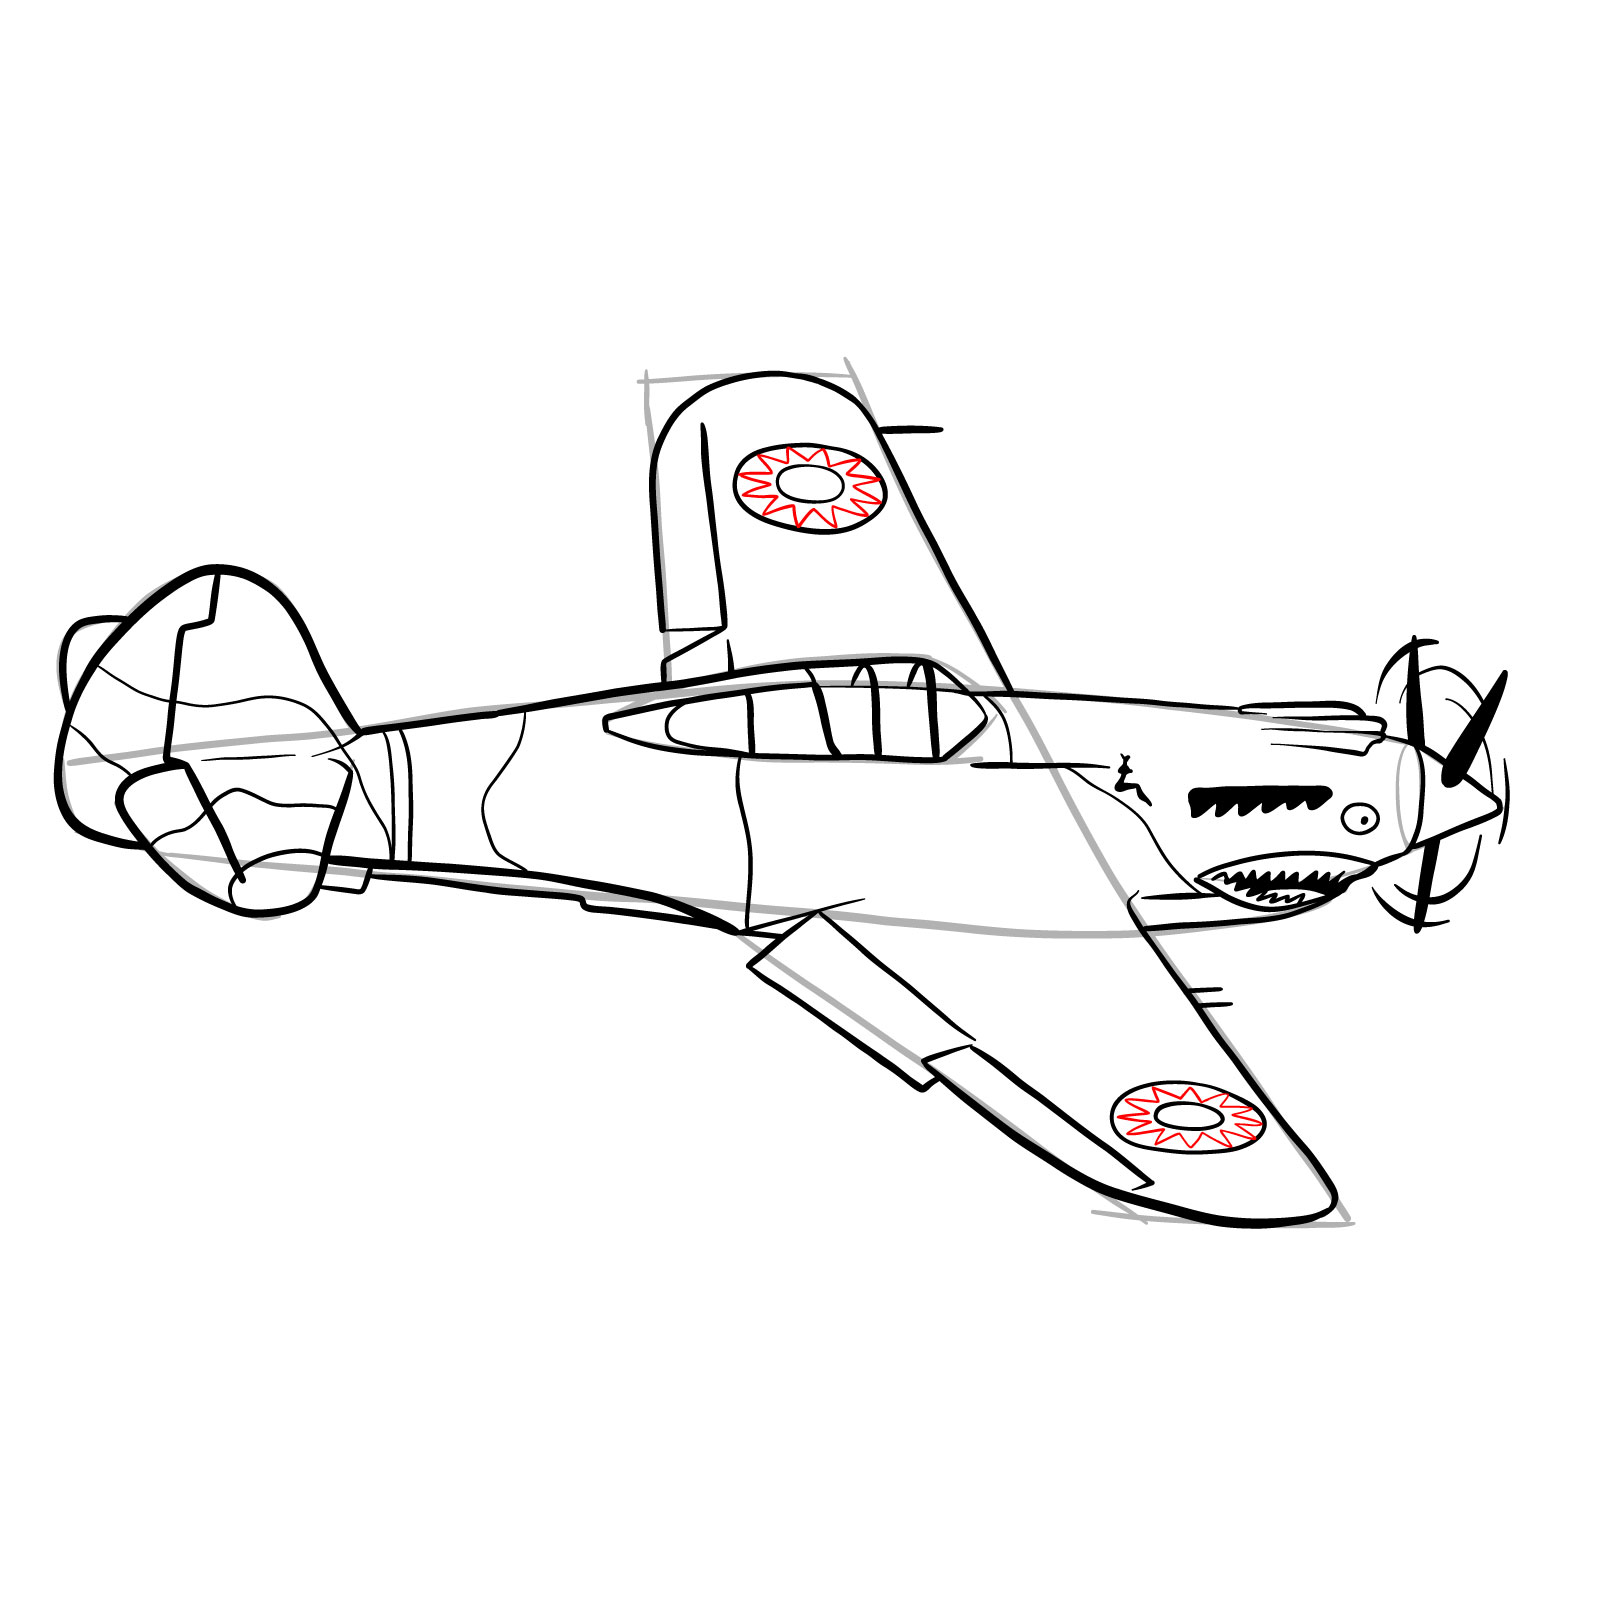 How to draw a P-40 Flying Tiger - step 30